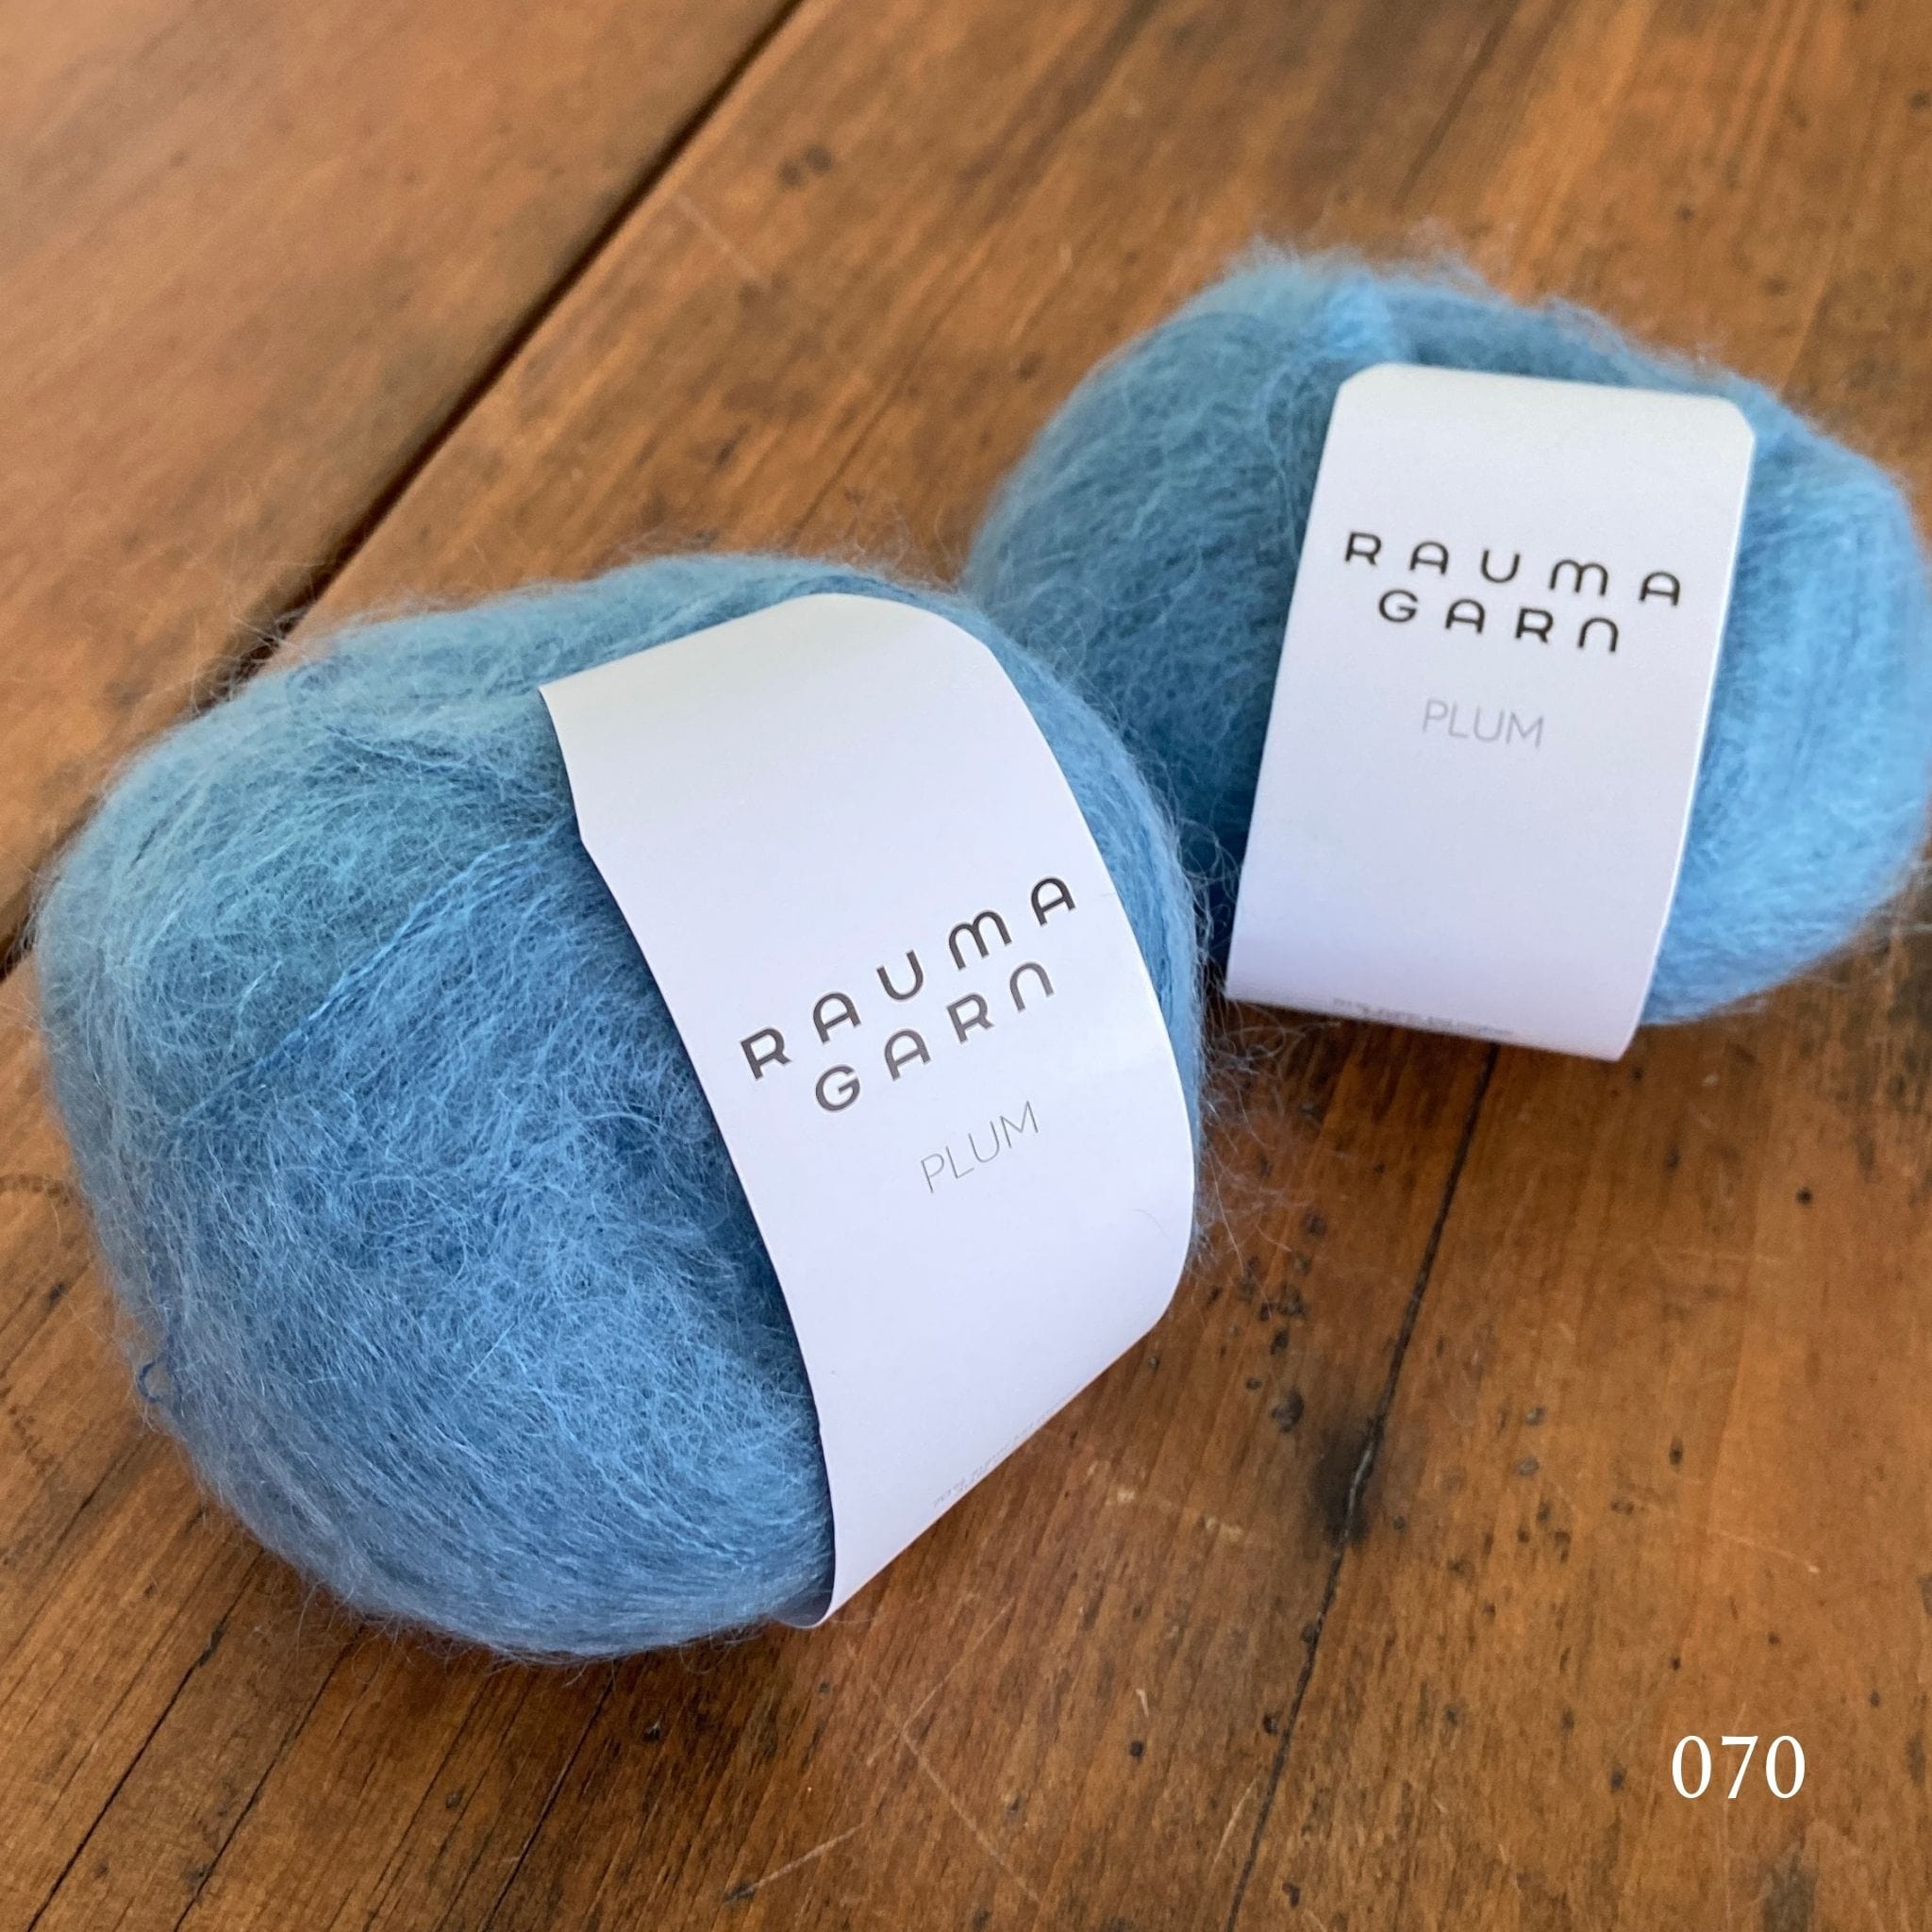 Two balls of Rauma Plum, a laceweight mohair blend yarn, in color 070, a baby blue